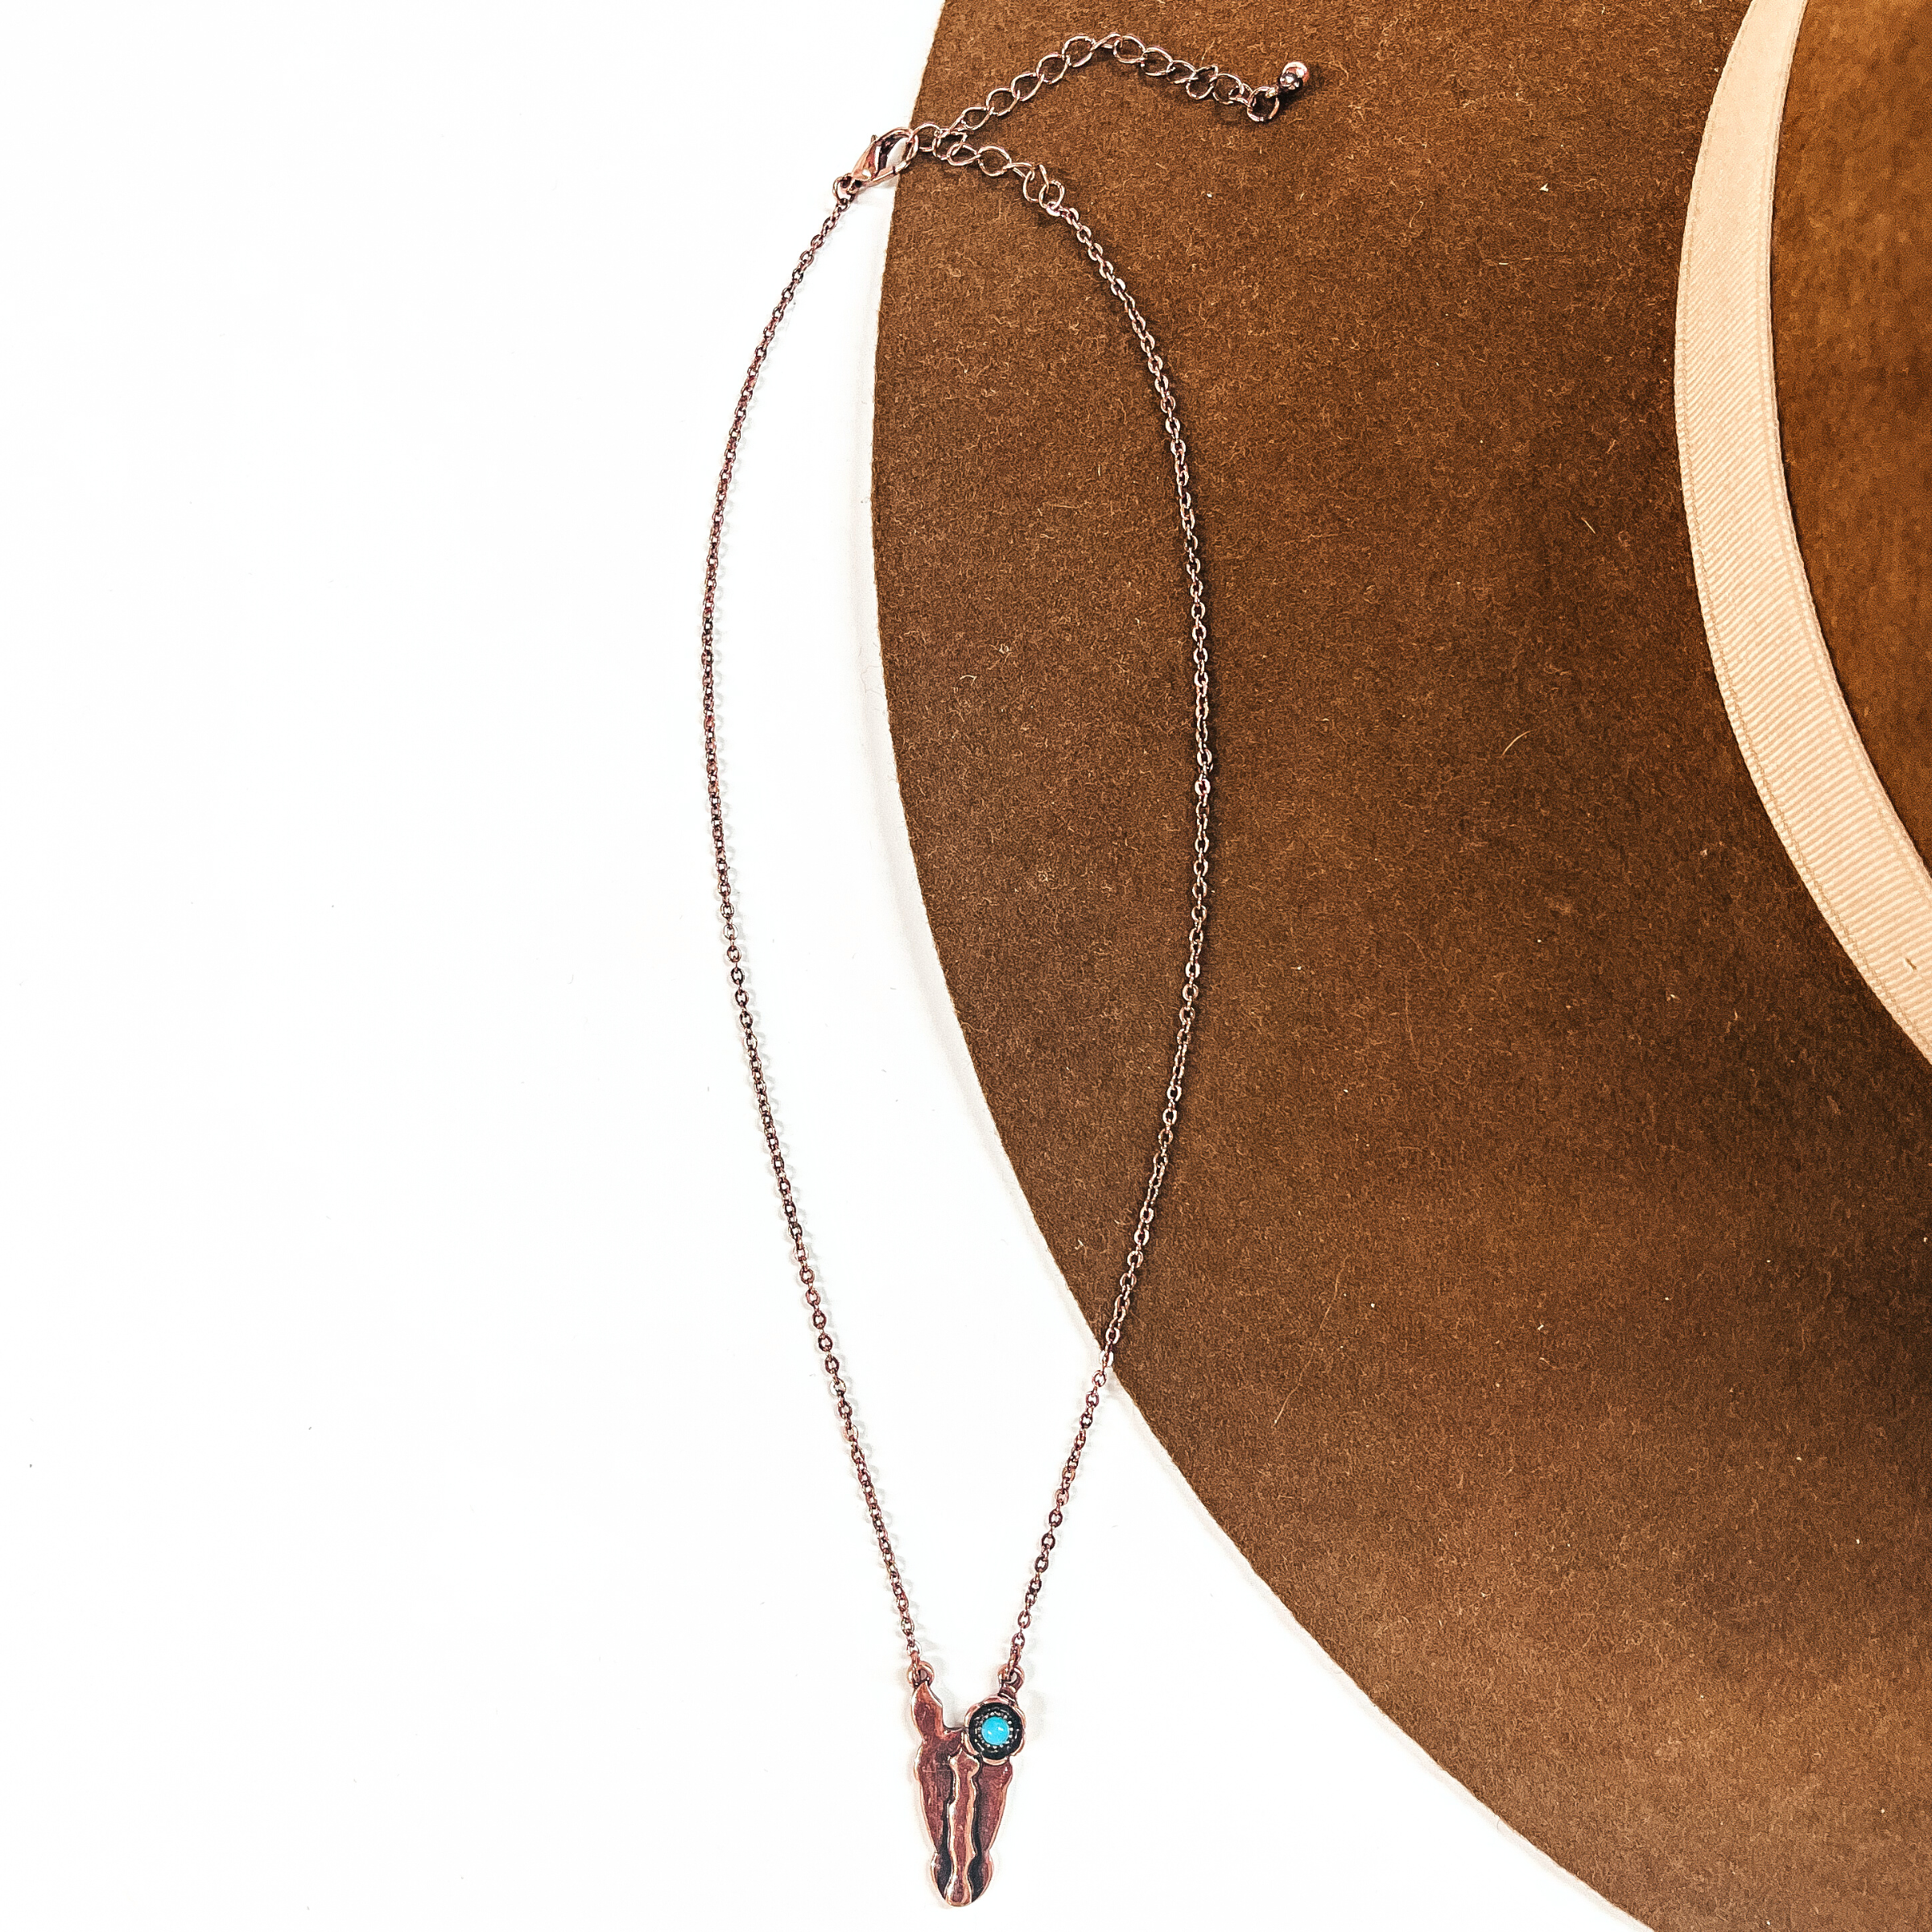 Chain Necklace with Horse Head Pendant in Copper Tone - Giddy Up Glamour Boutique